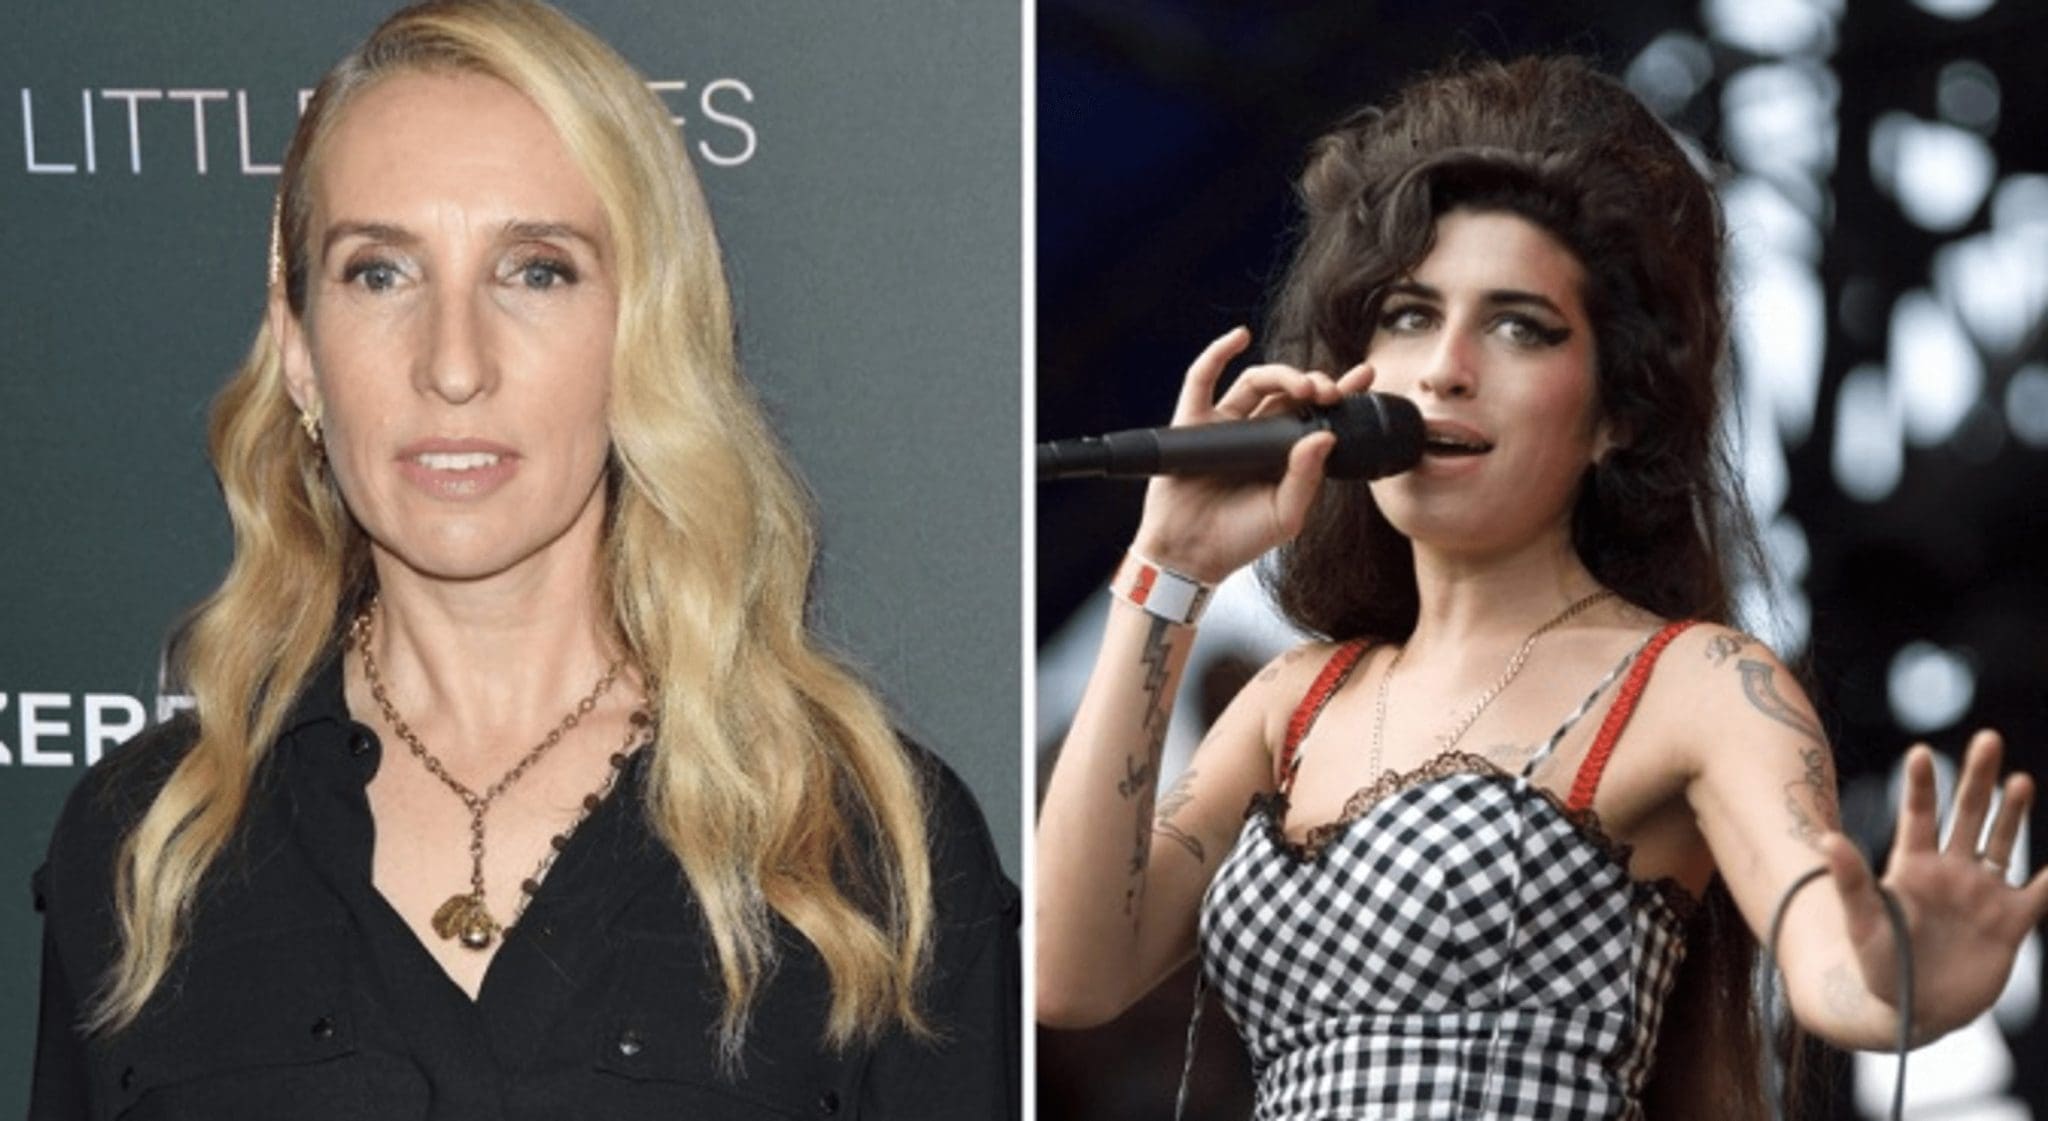 Amy Winehouse's Biopic Now Has Been Entrusted To The Director Of Fifty Shades Of Grey, Sam Taylor-Johnson